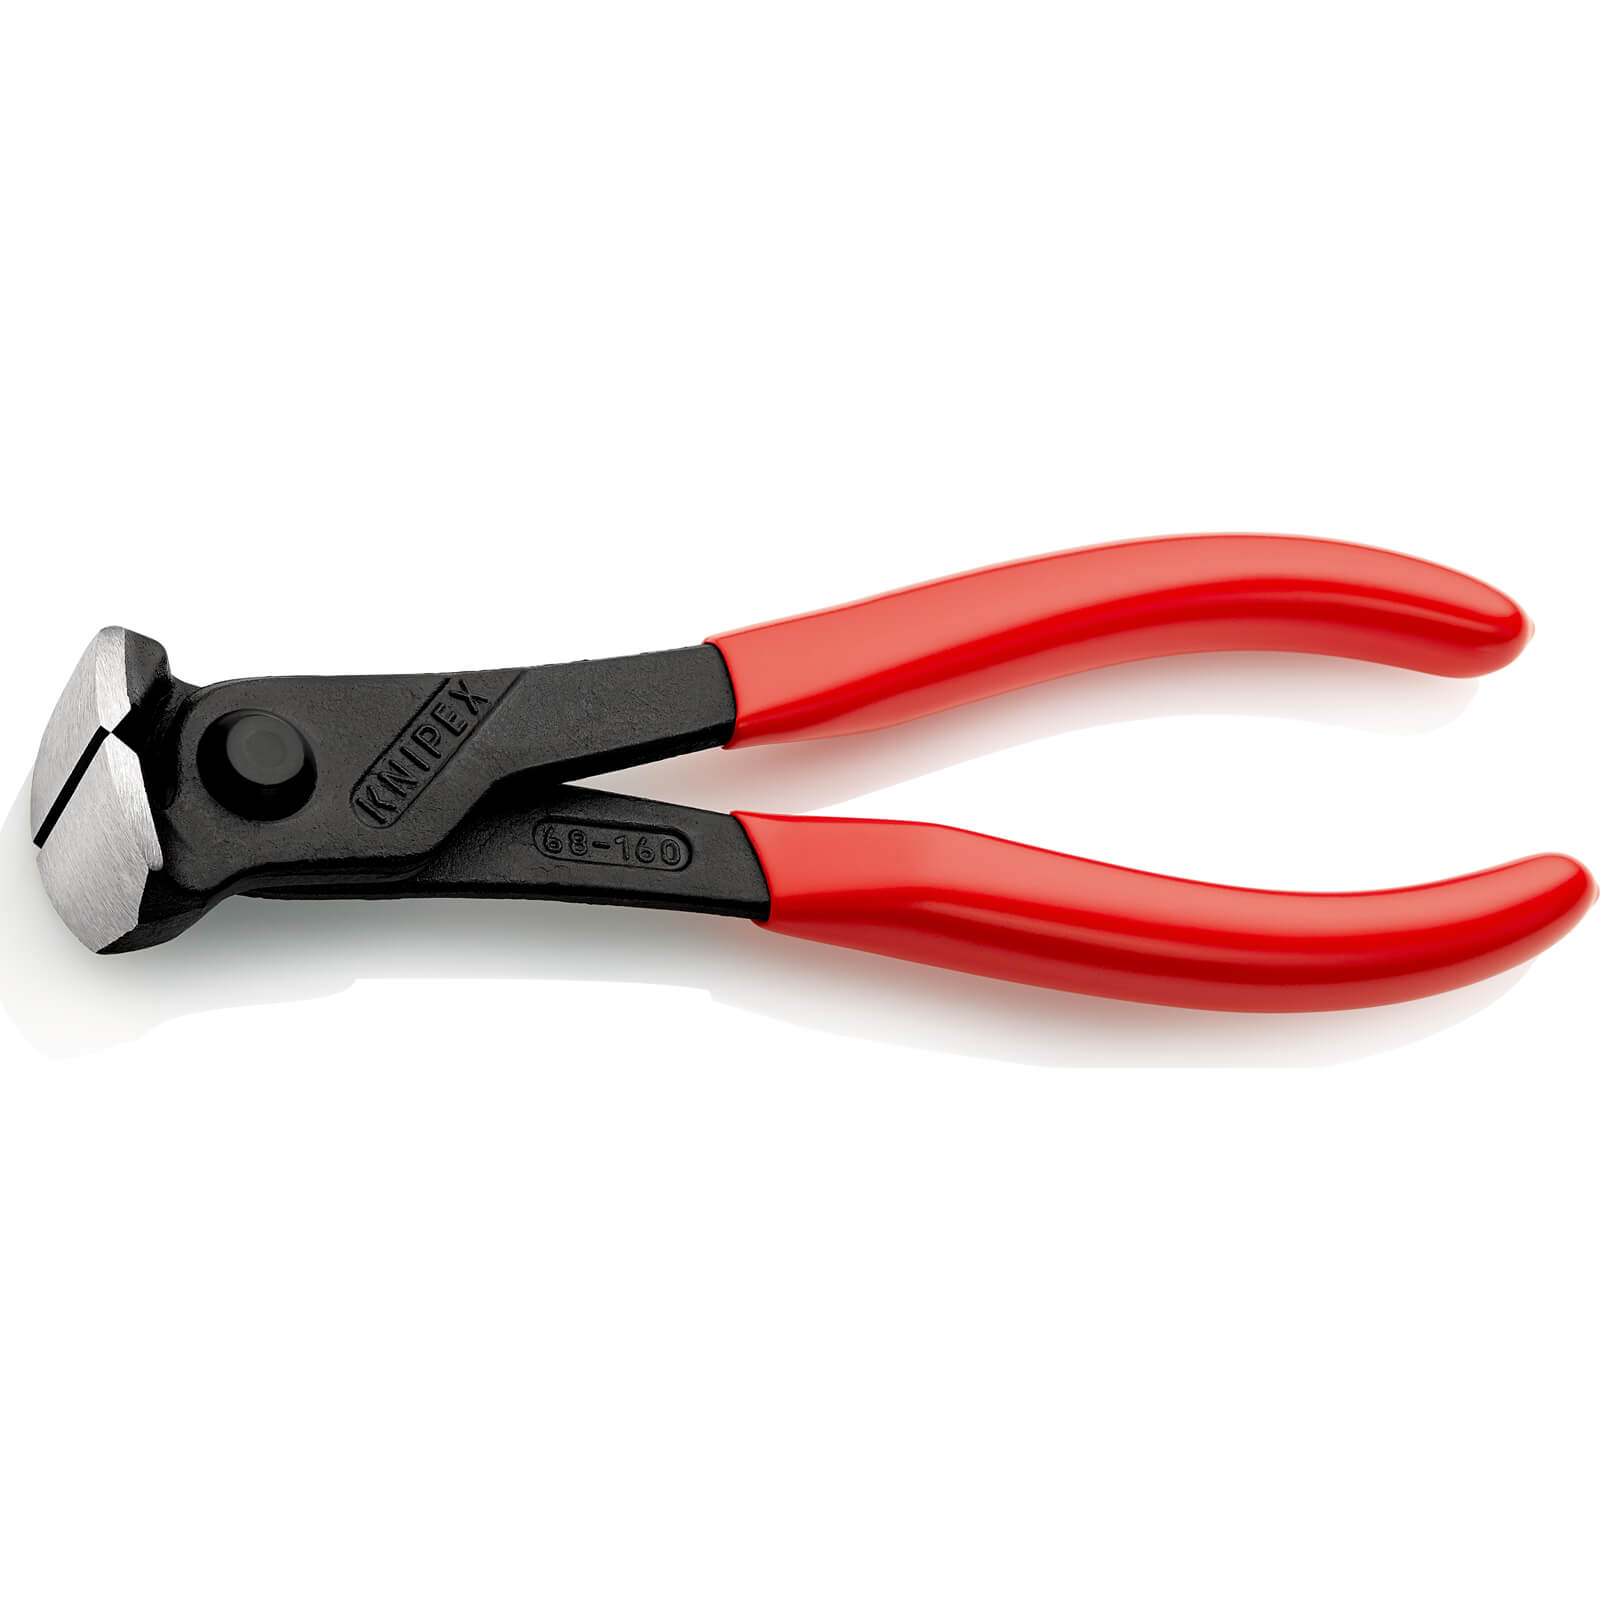 Photos - Pliers / Wire Cutters KNIPEX 68 01 Steel Rebar Fixers Concrete End Cutting Pliers 160mm 68 01 16 